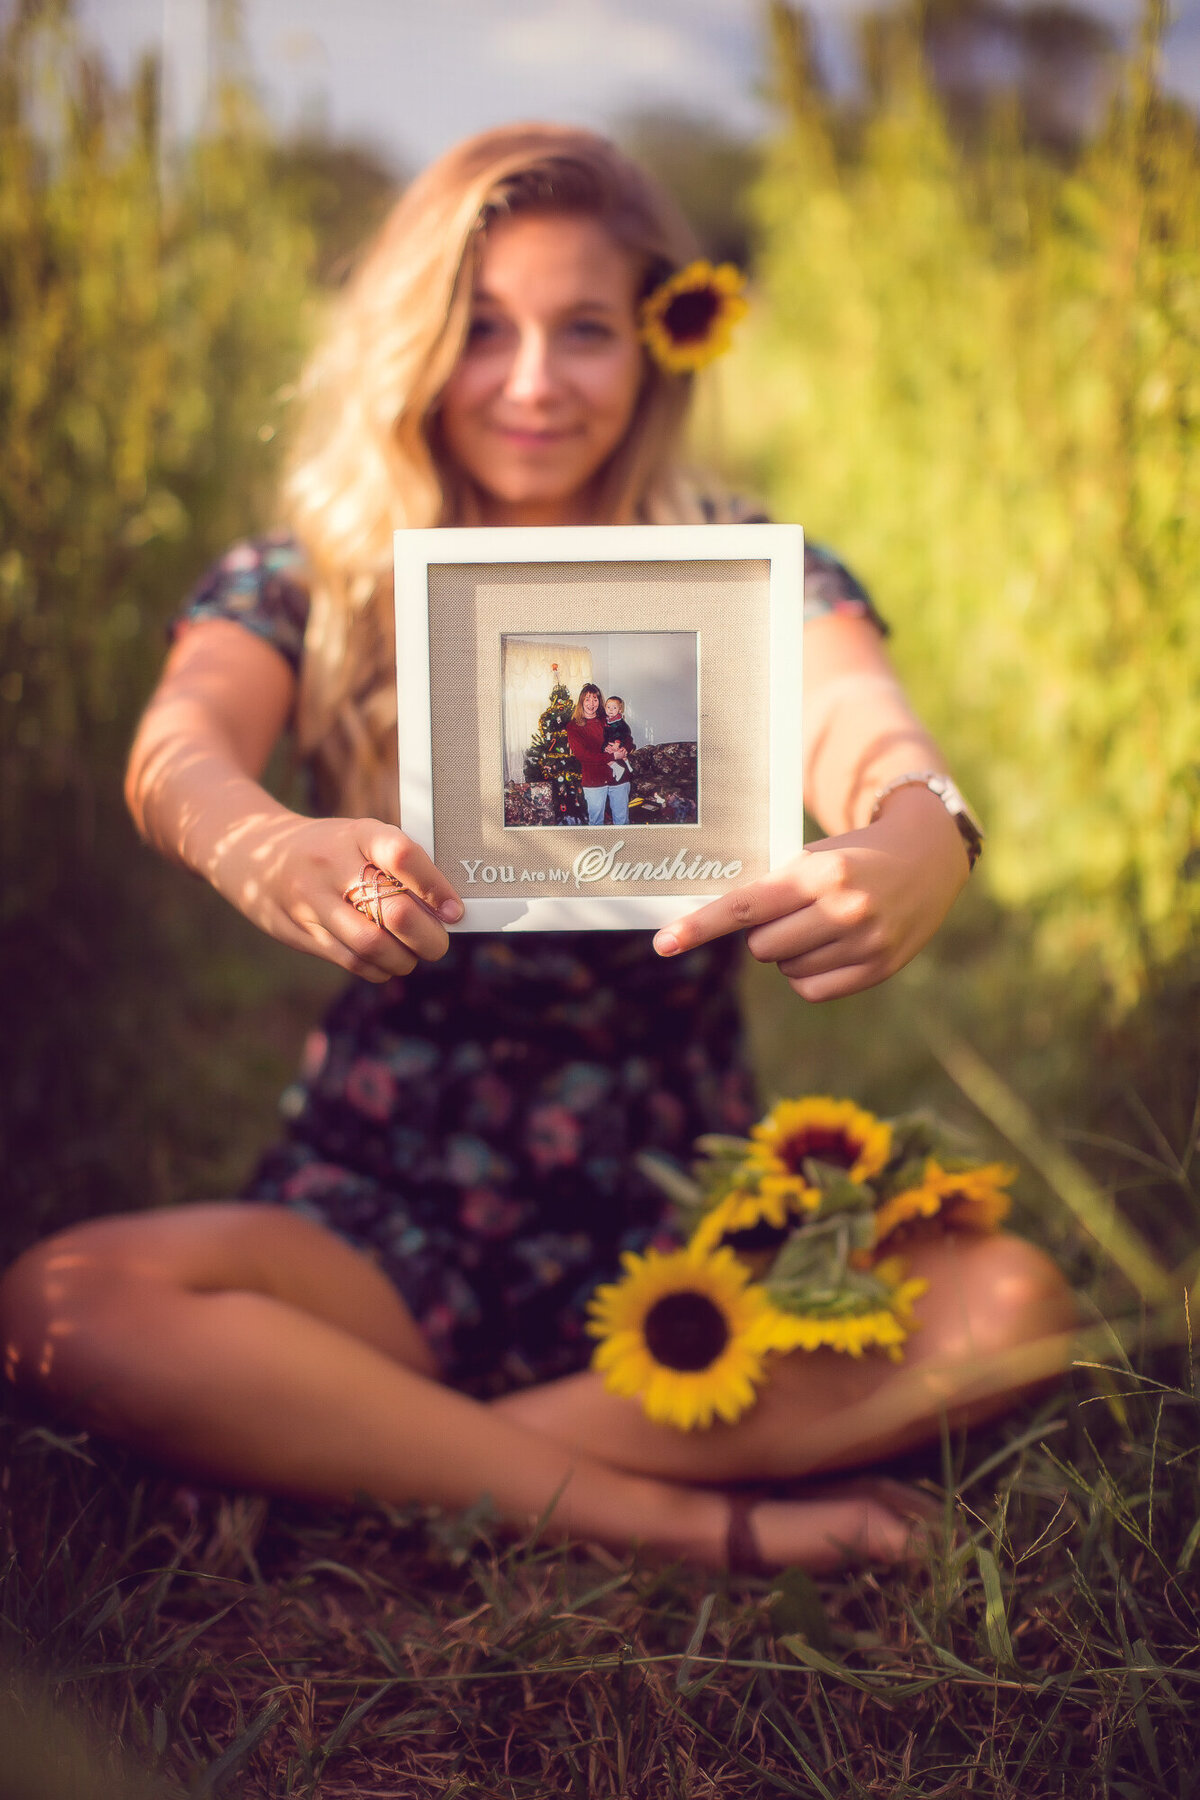 Girl in Sunflower field holding an image of her passed mom and herself